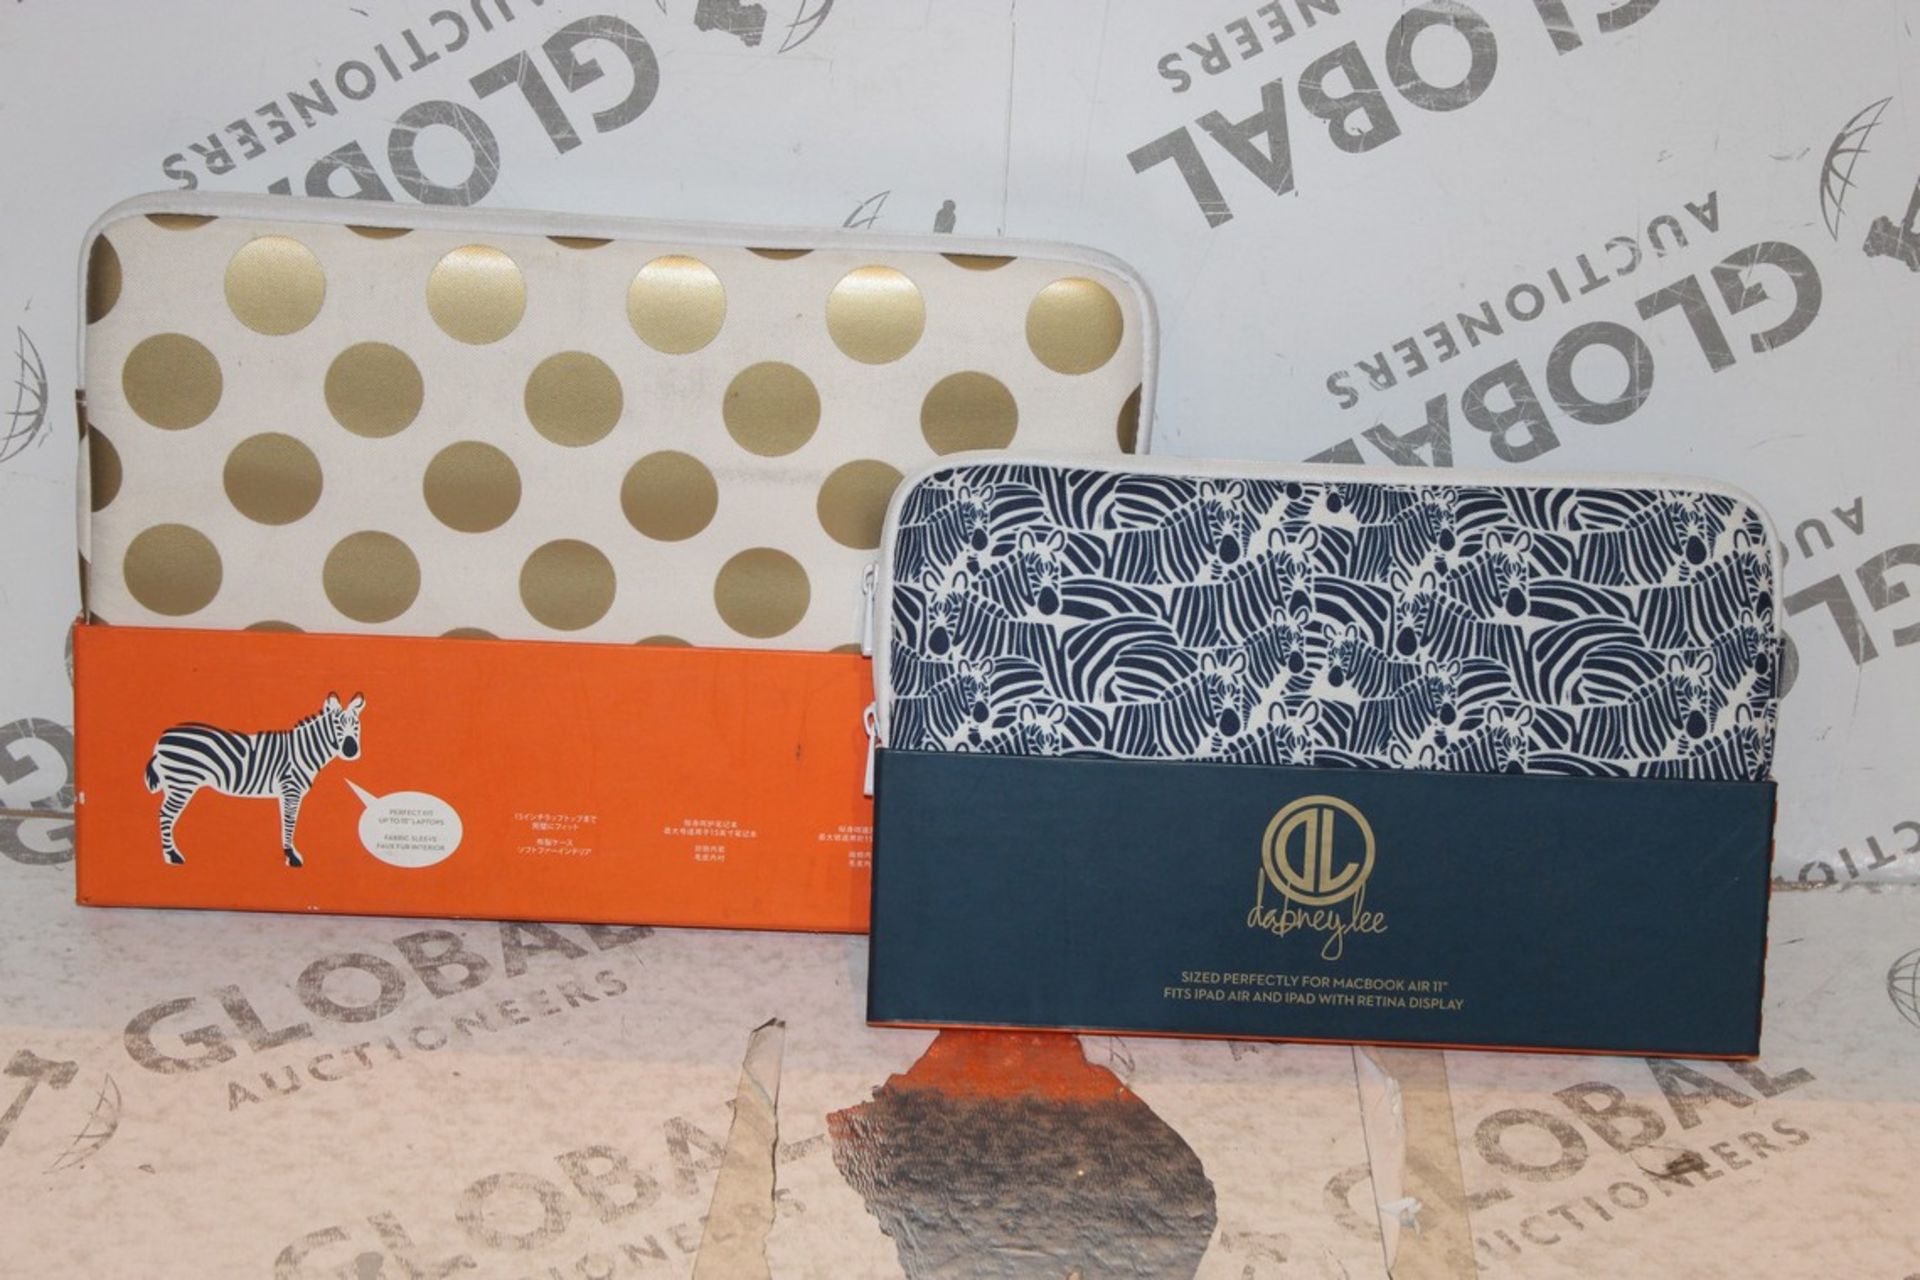 2 Assorted Brandy Lea MacBook Cases in Assorted Sized Combined RRP £80